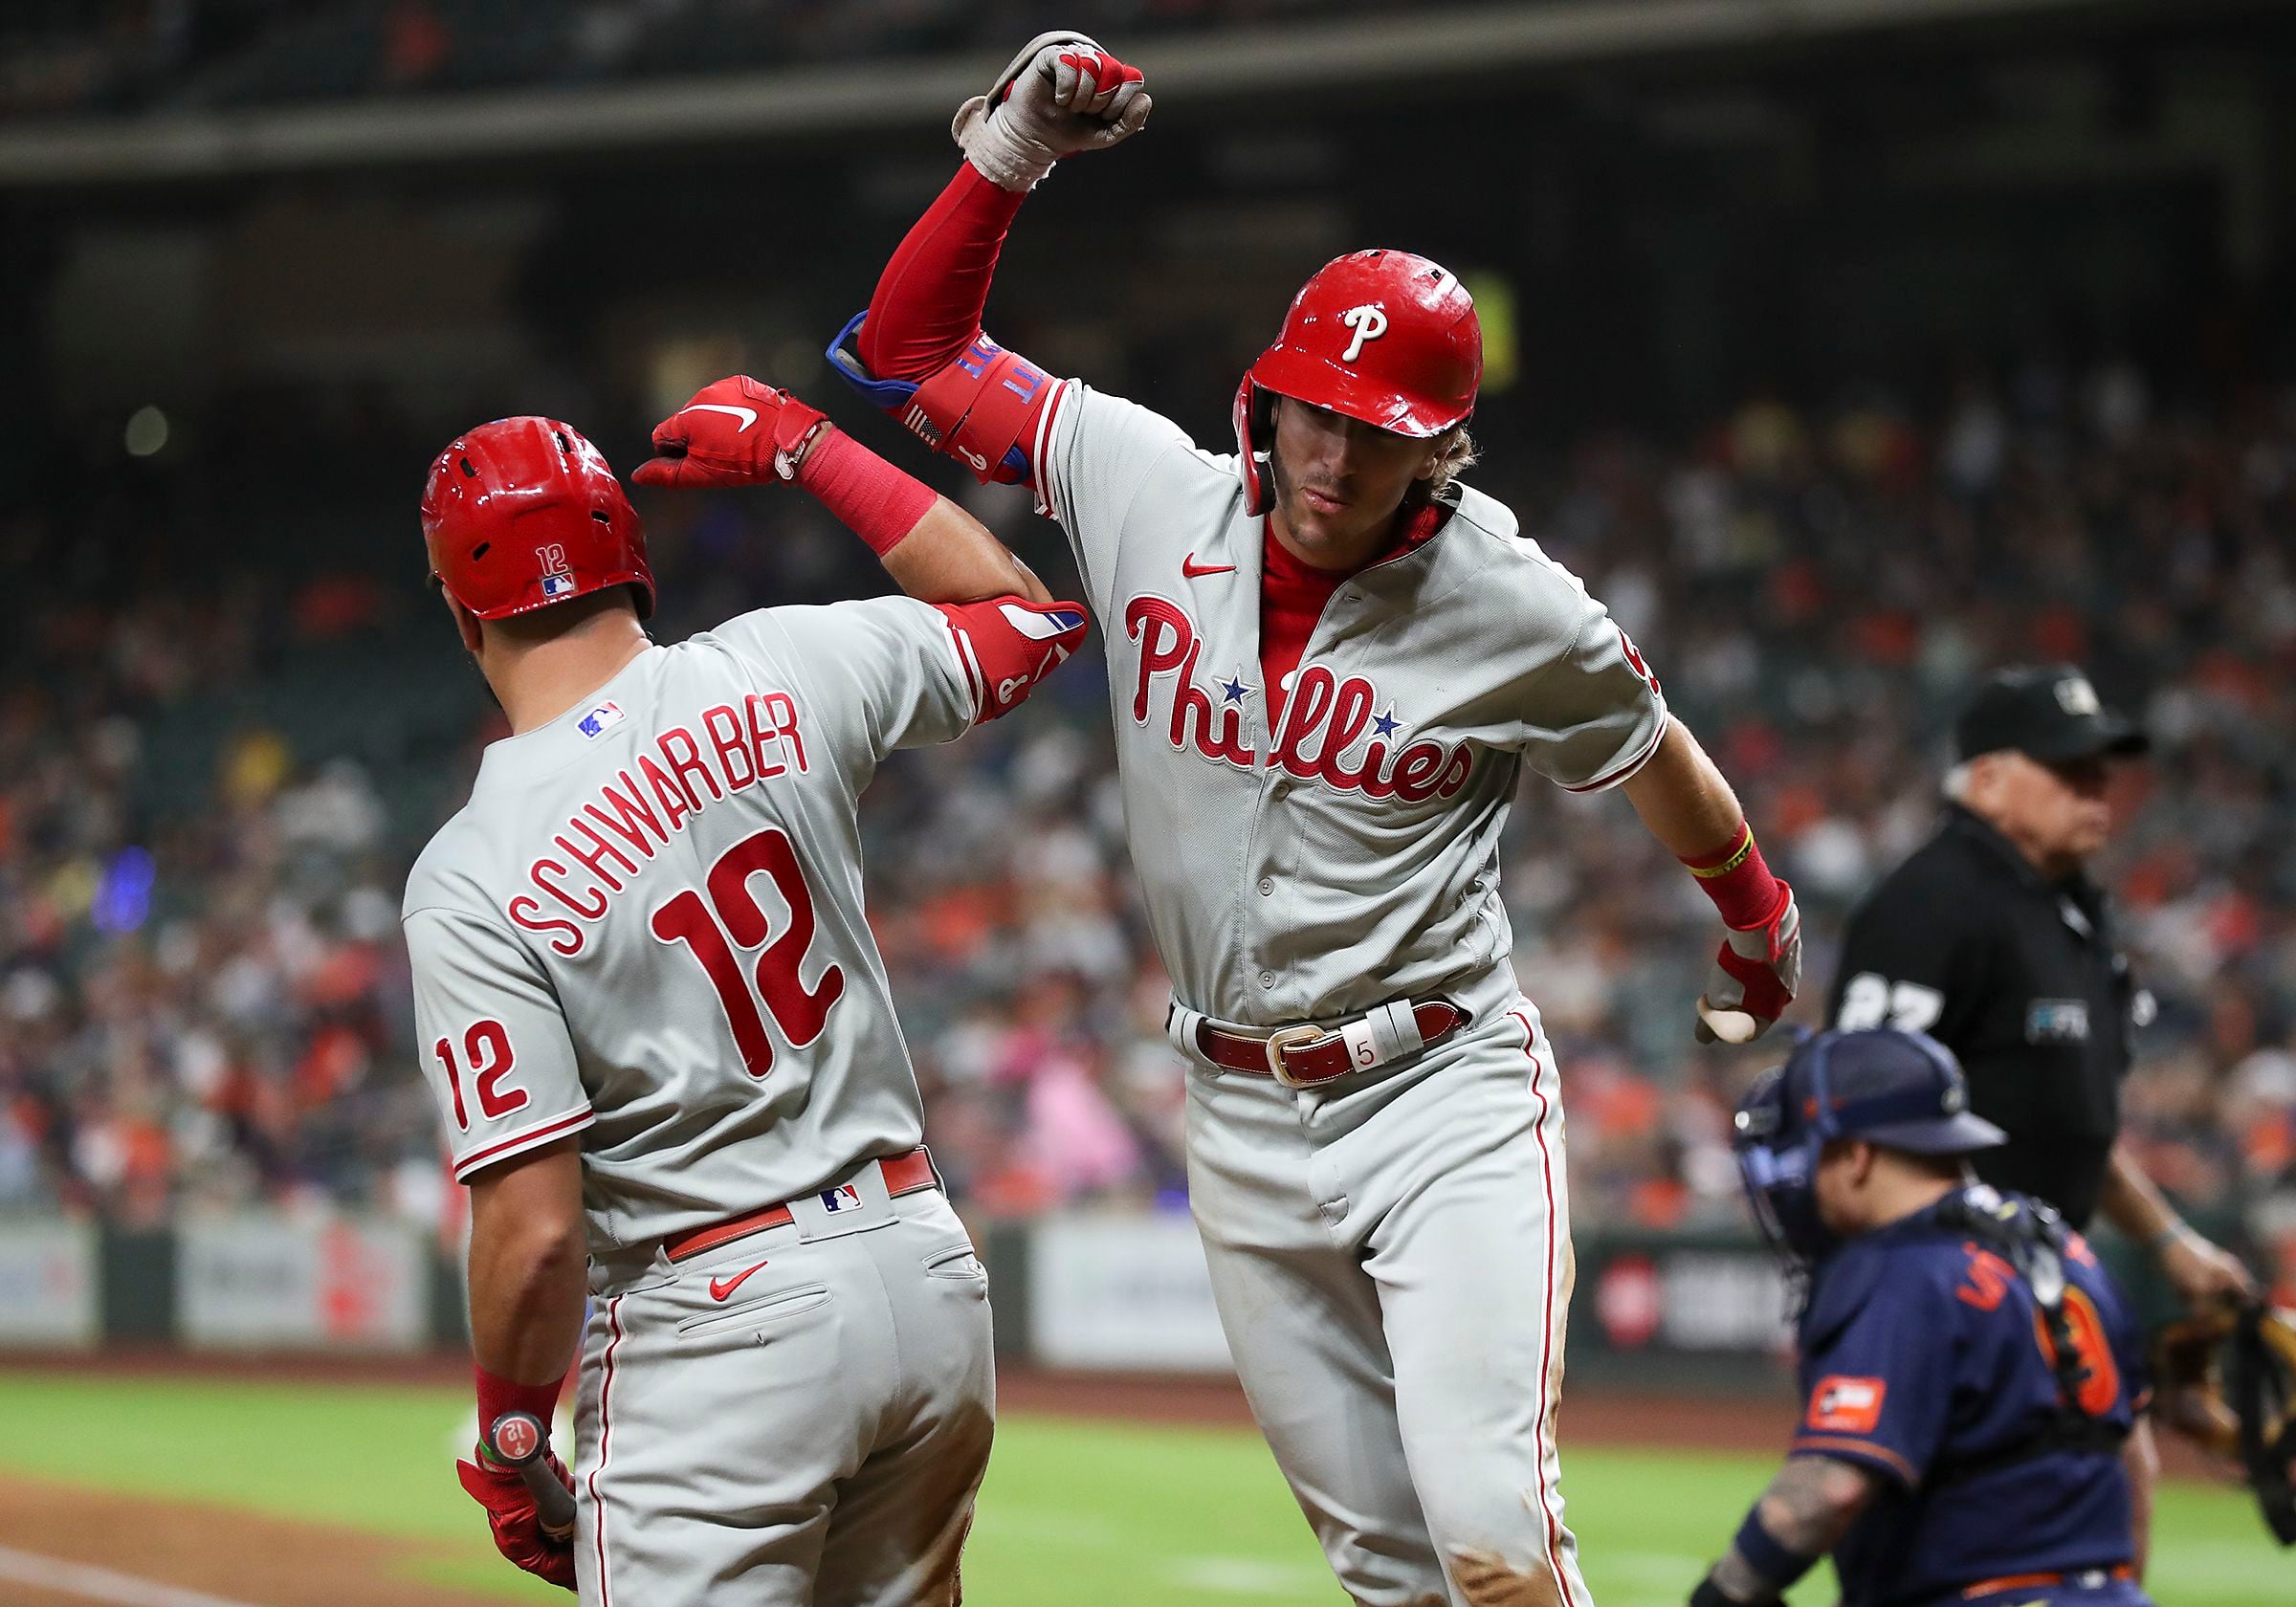 Phillies Clinch Playoff Berth Ending Longest Active NL Postseason Drought -  Fastball